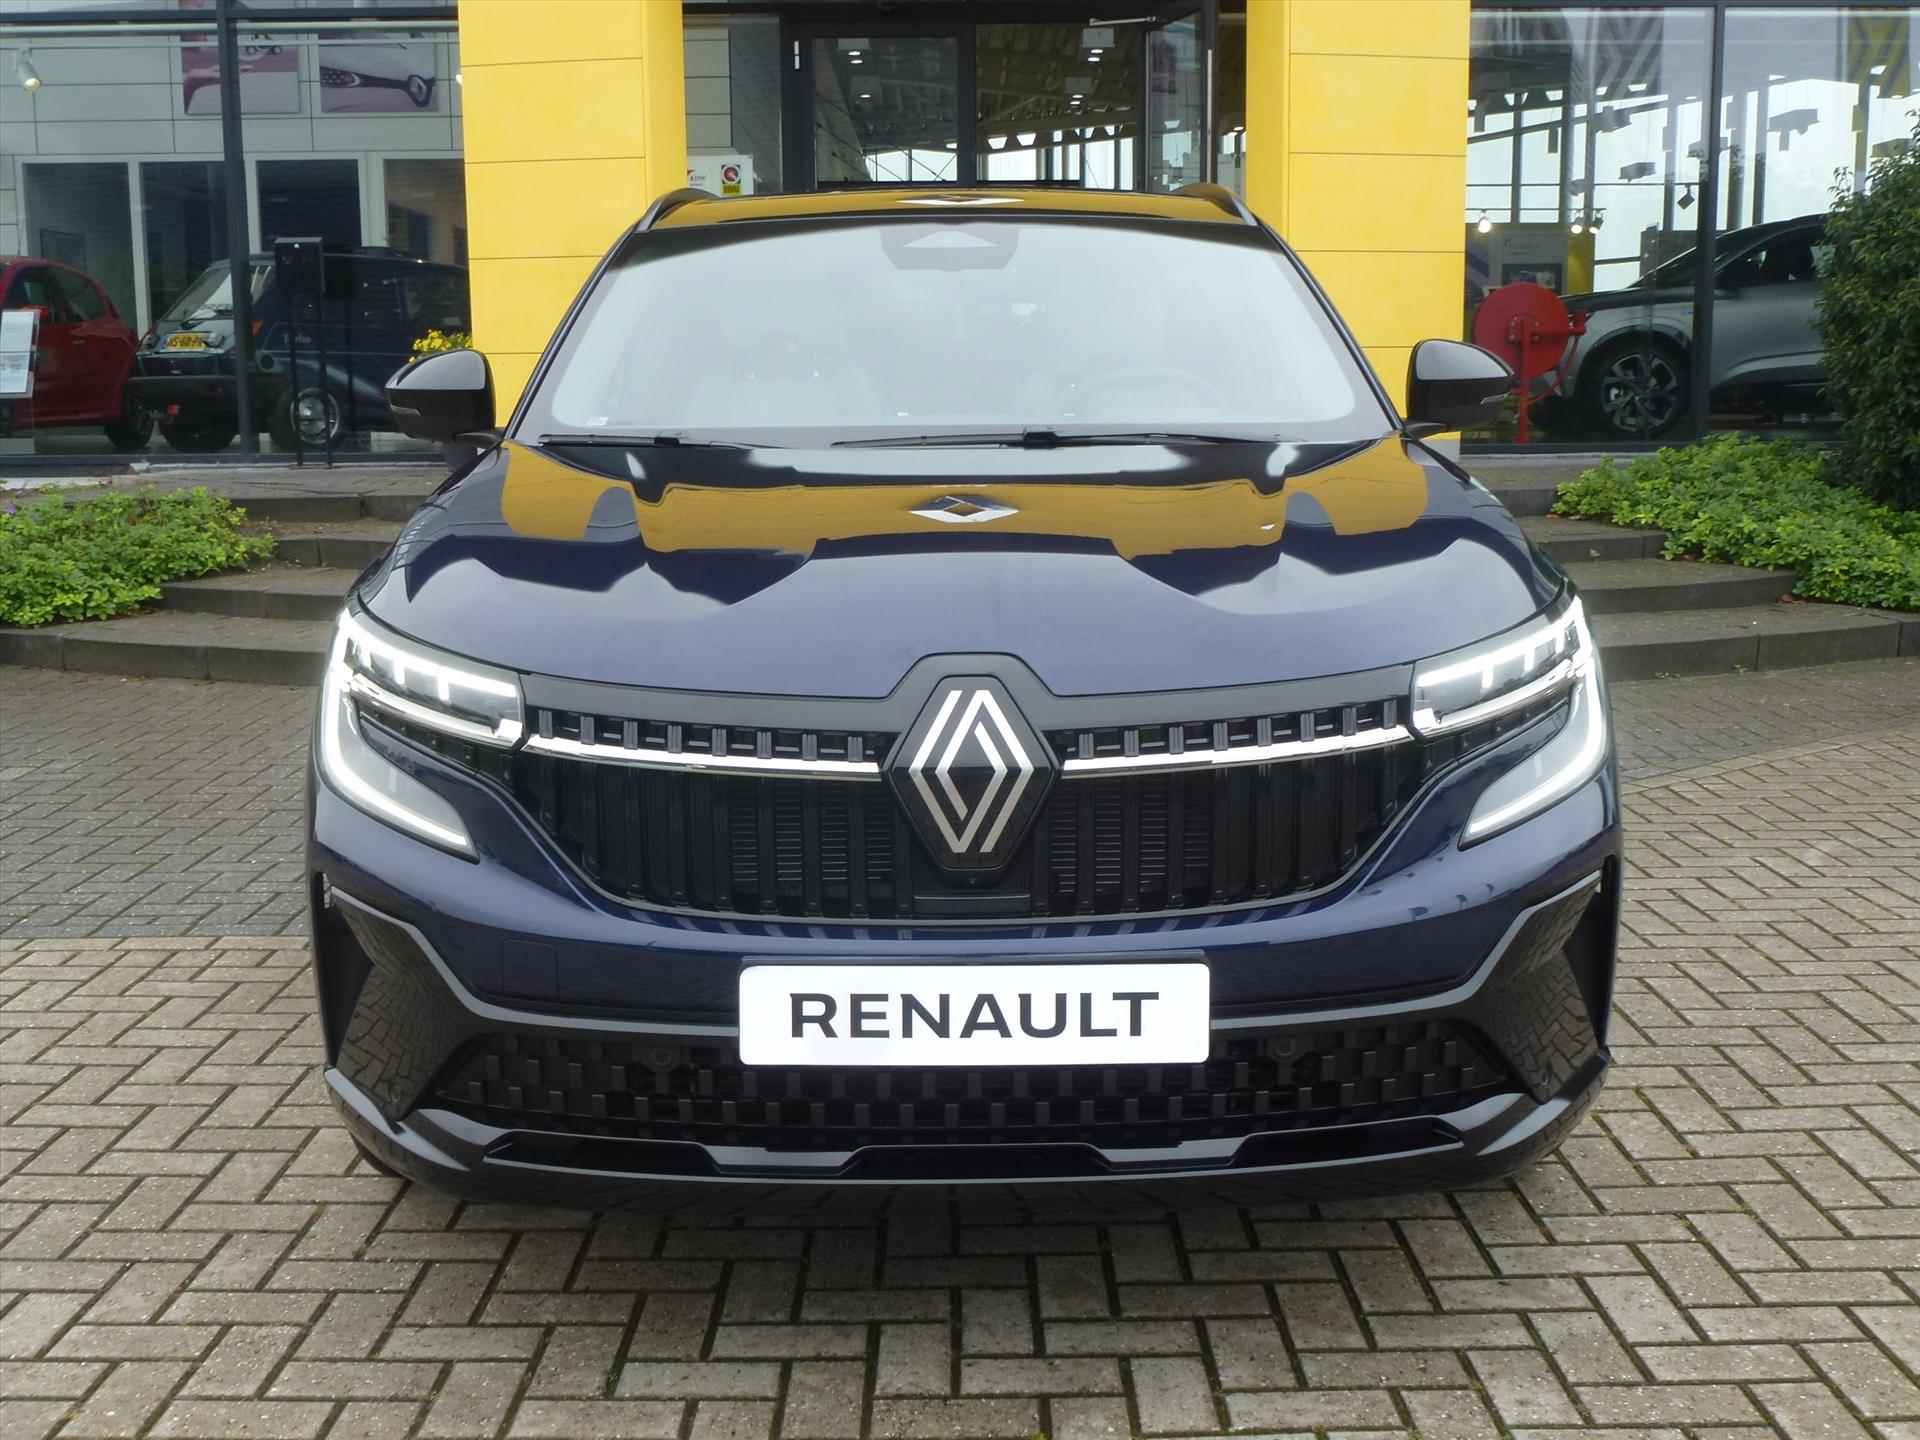 Renault Espace E-Tech Full Hybrid 200PK Iconic / 7 Persoons /  Panoramadak / Head-up display - 3/40